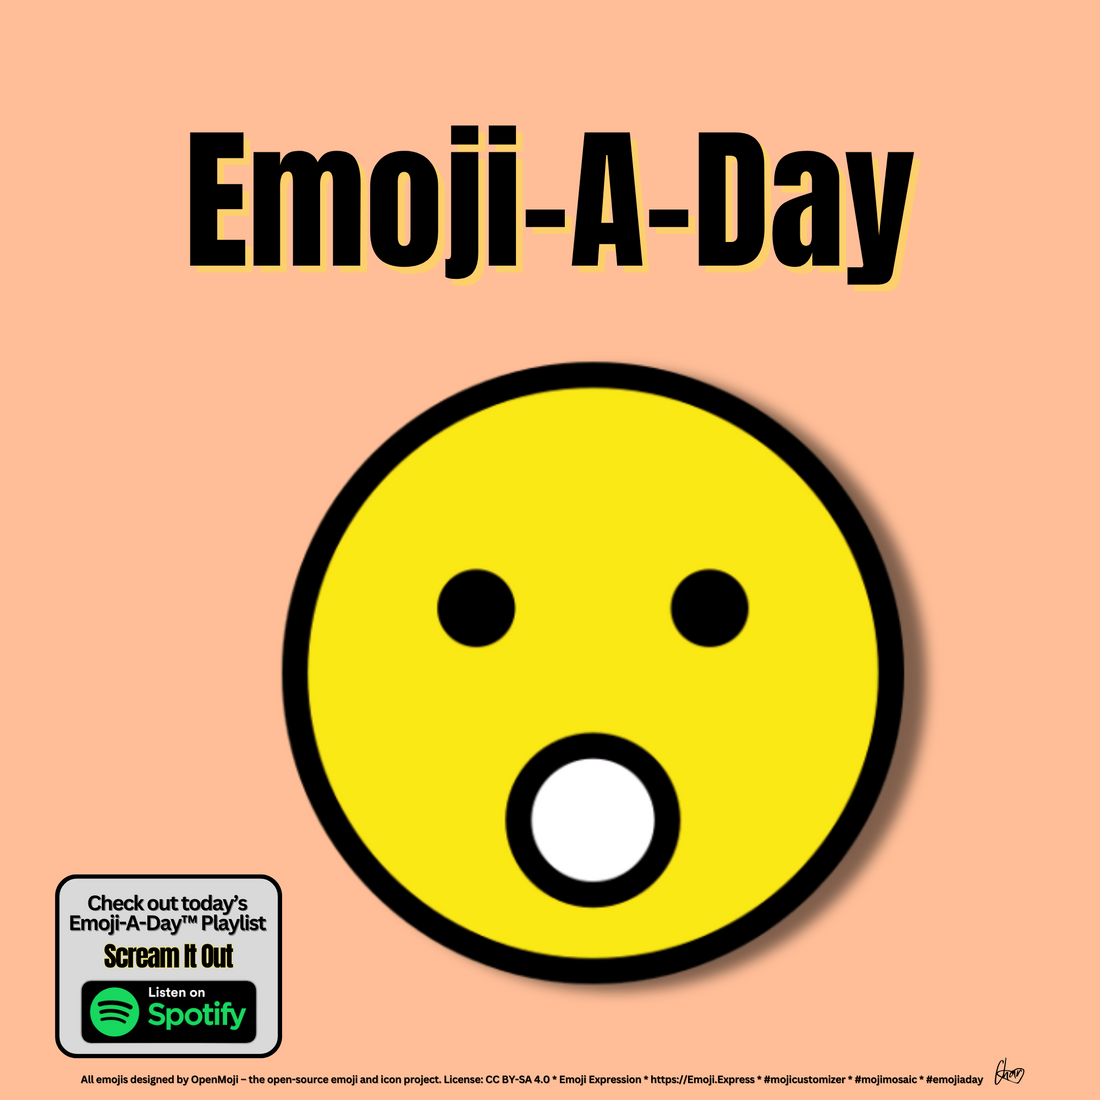 Emoij-A-Day theme with Face with Open Mouth emoji and Scream It Out Spotify Playlist